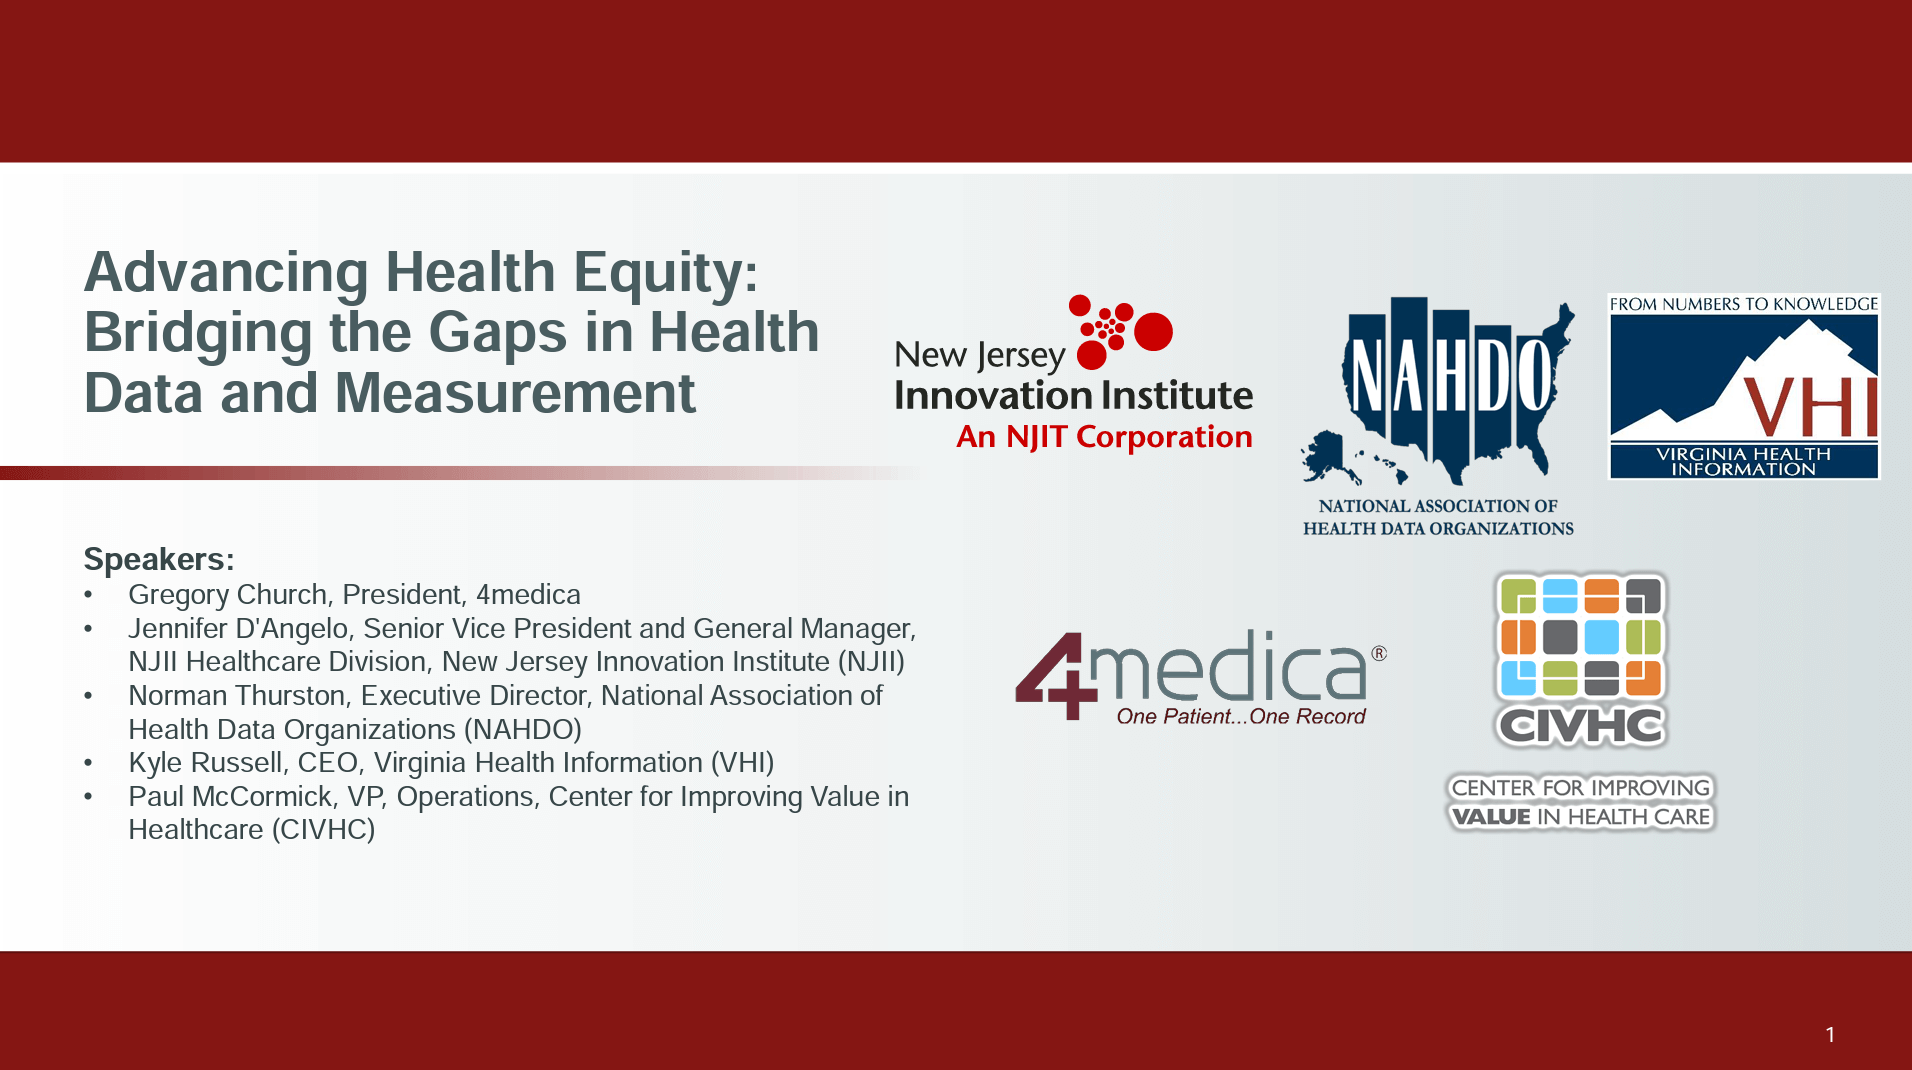 Advancing Health Equity Speakers